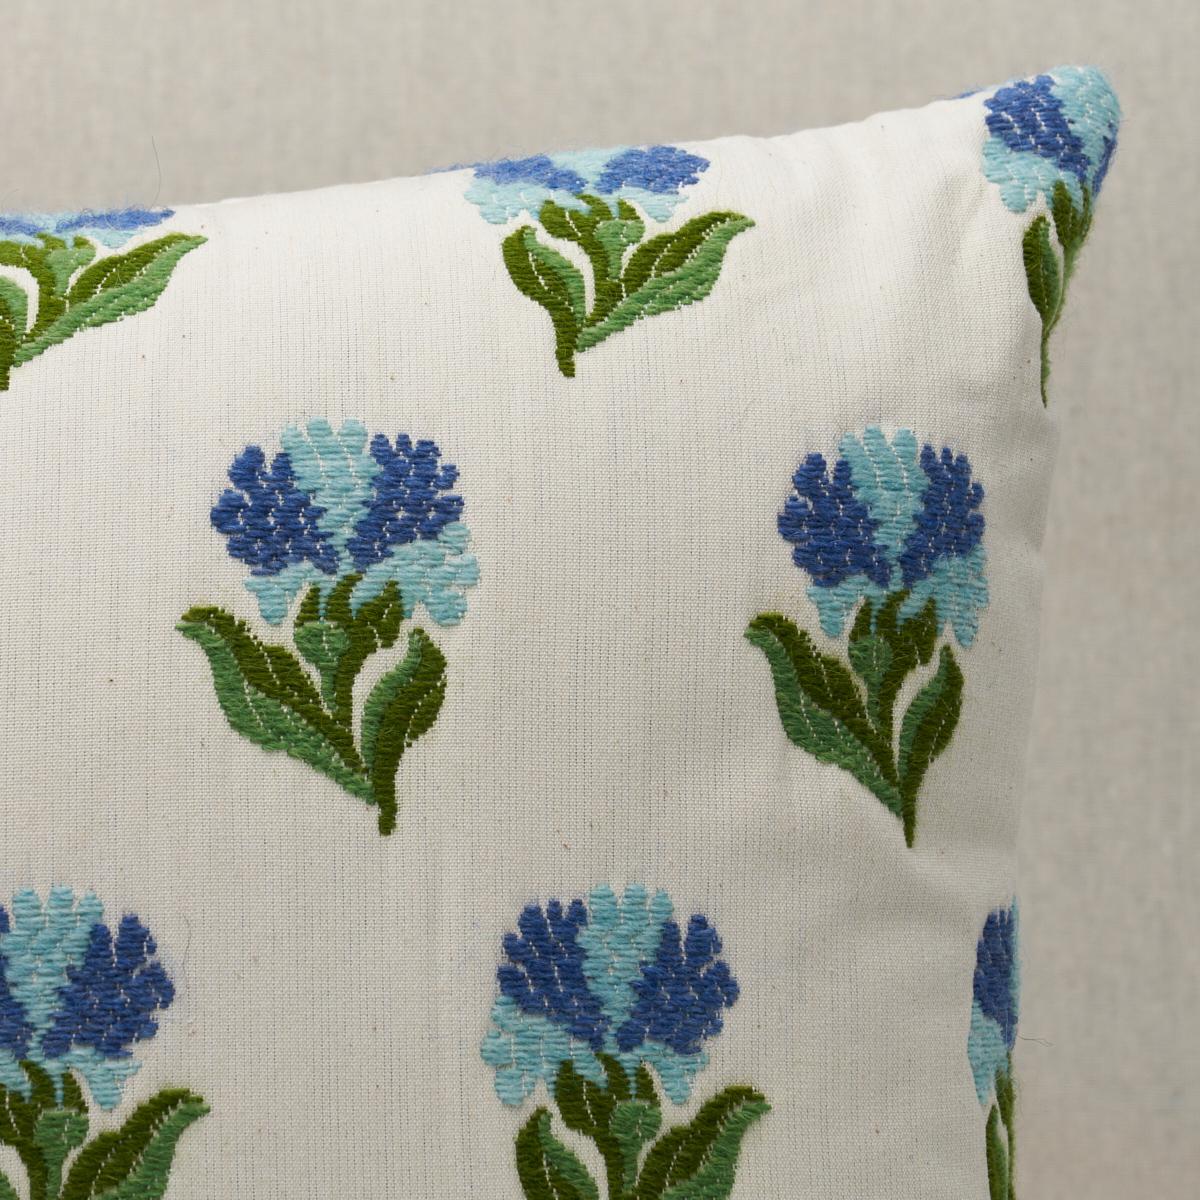 This pillow features Rosina Floral with a knife edge finish. Featuring a unique woven rosebud pattern, Rosina Floral in cornflower is an appealing dimensional design with an embroidered look. Pillow includes a feather/down fill insert and hidden